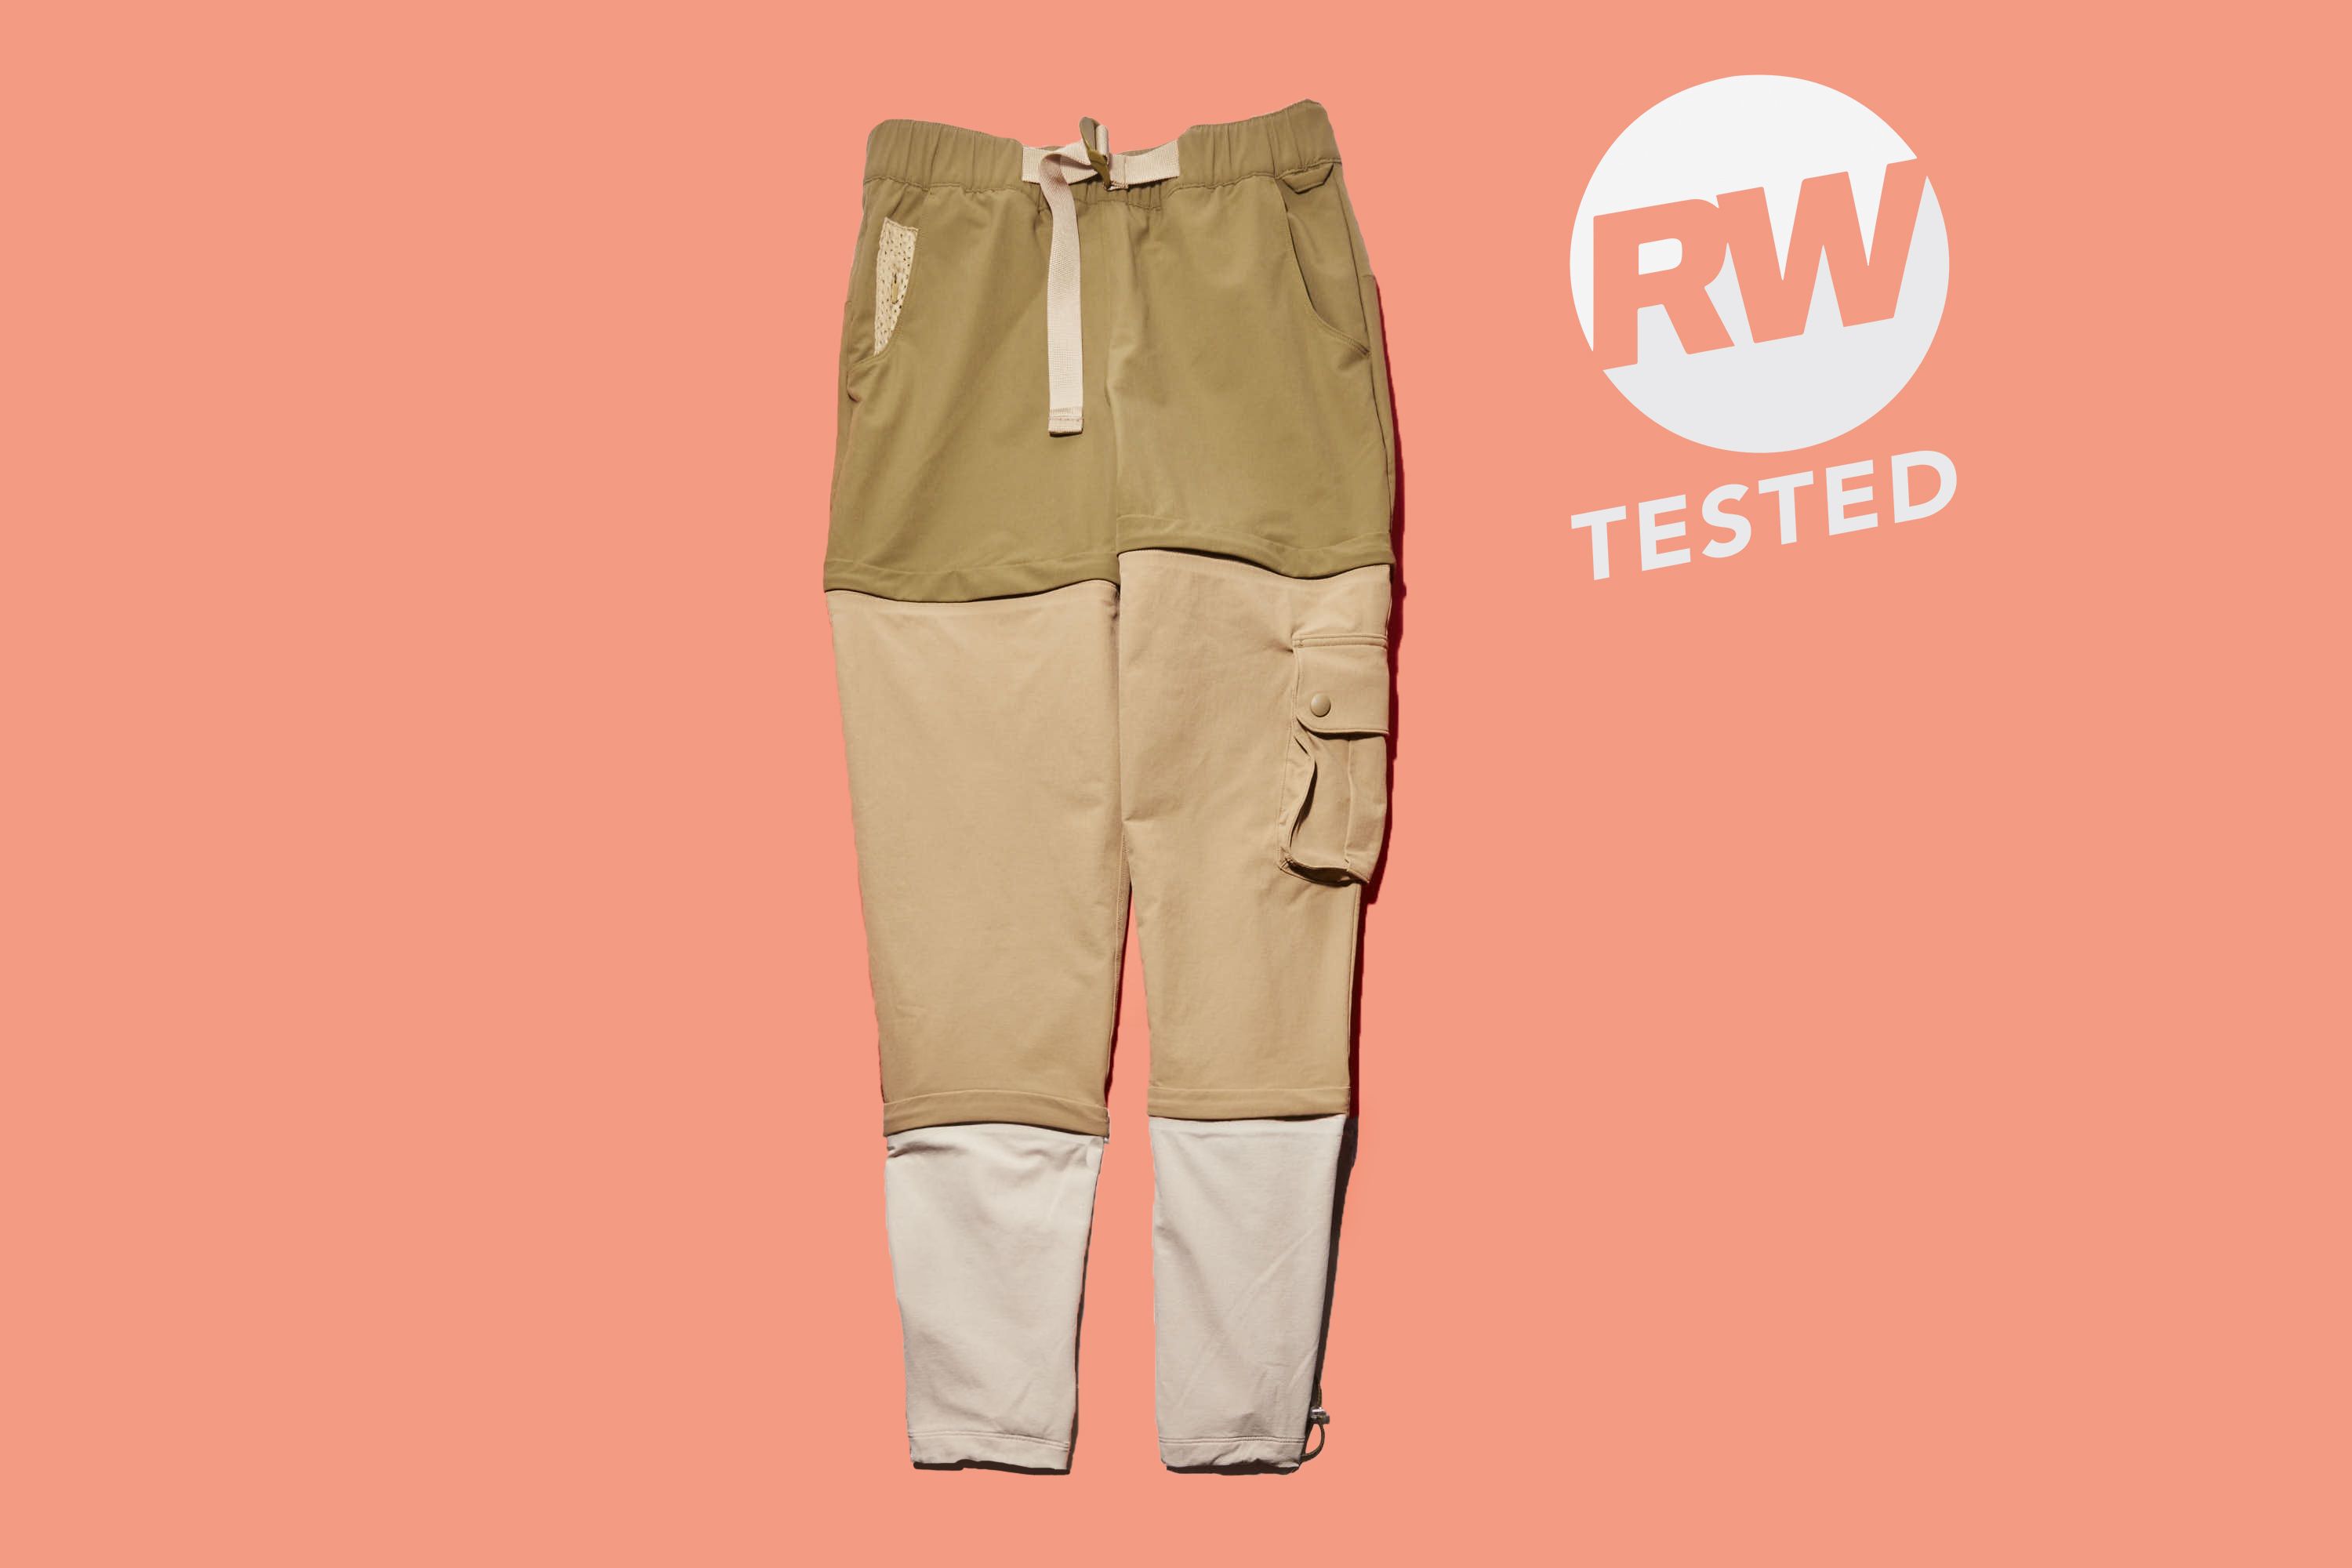 cargo pants with lots of pockets